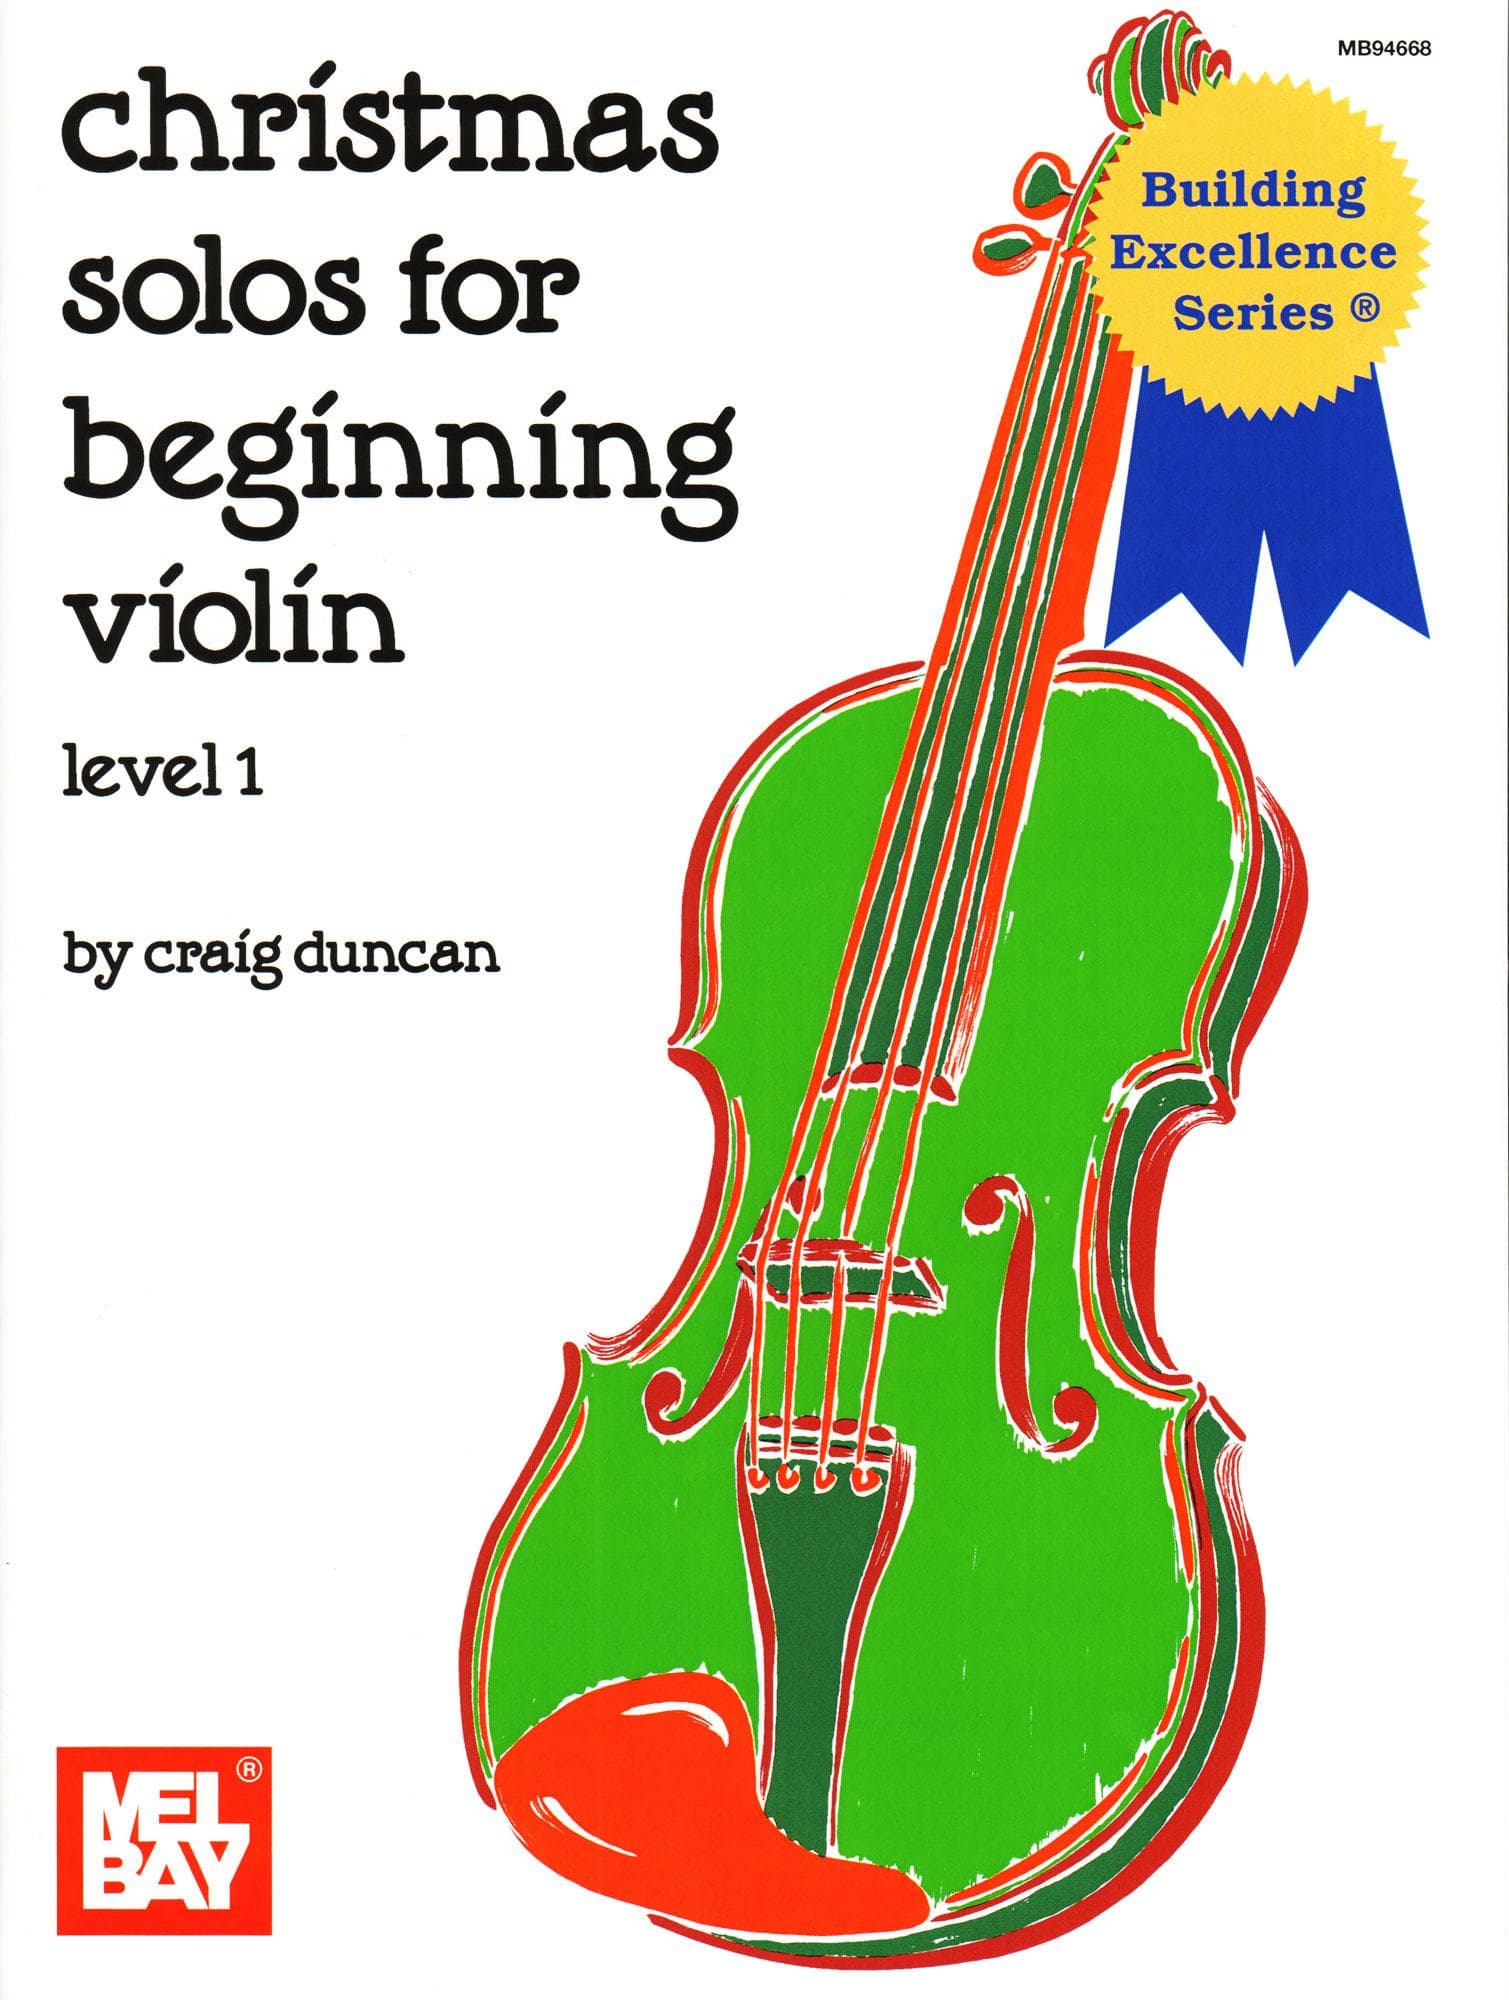 Christmas Solos for Beginning Violin, Level 1 - Violin Parts and Piano Accompaniment for Flexible Ensemble - by Craig Duncan - Mel Bay Publications